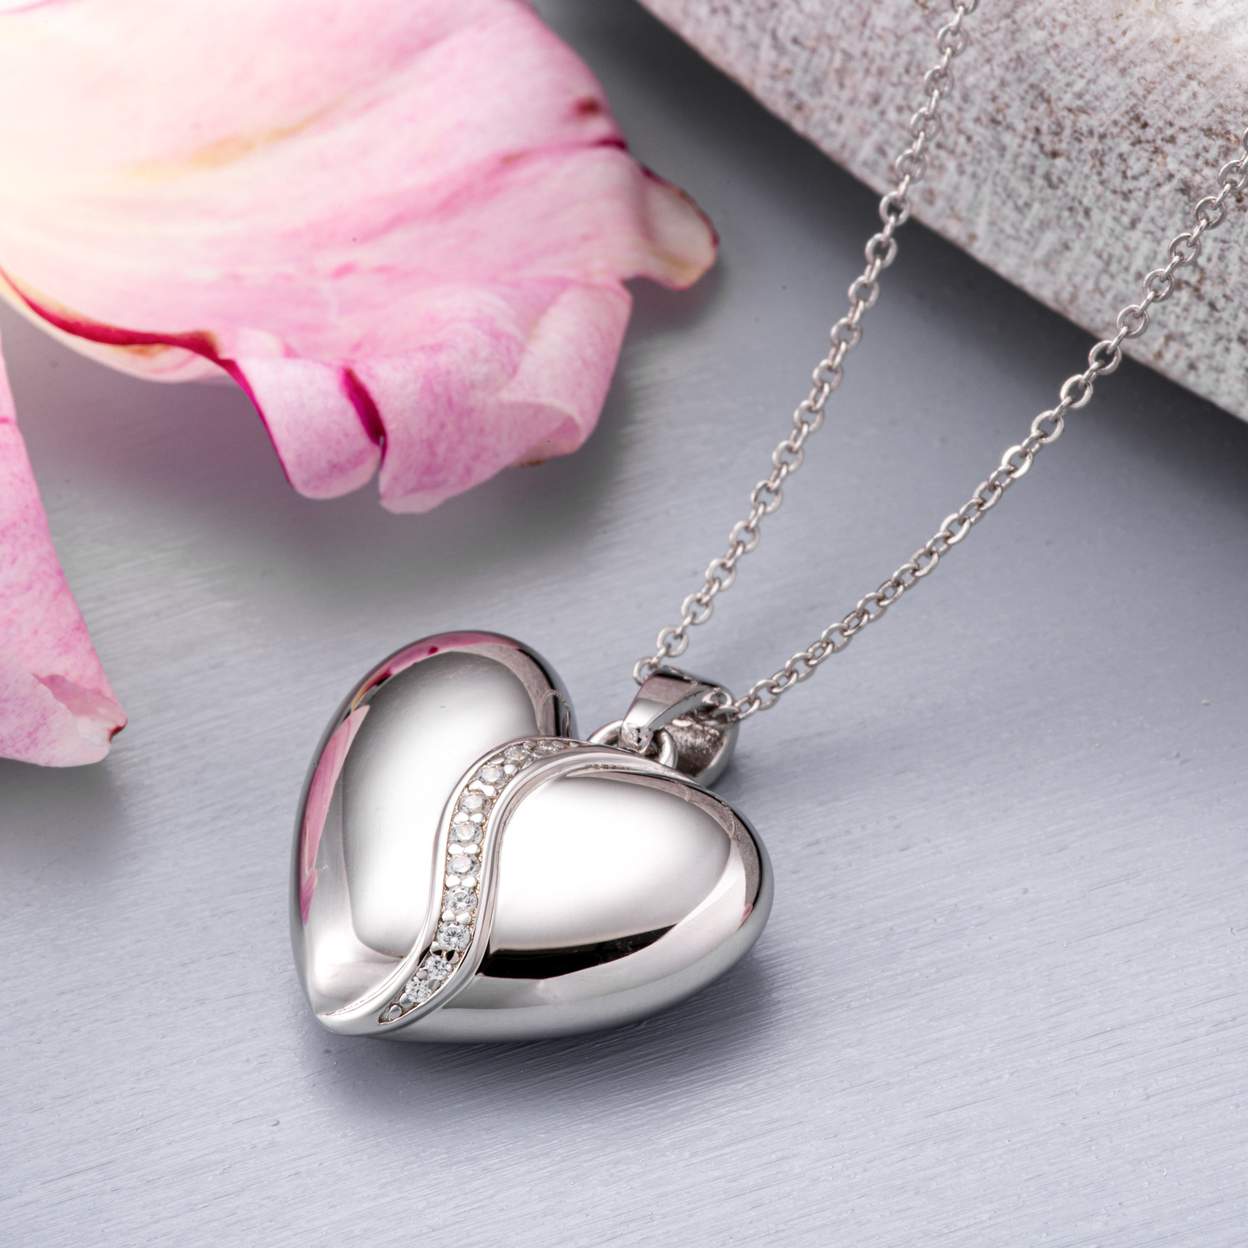 My Angel | Cremation or Keepsake Jewellery and Urns for ashes